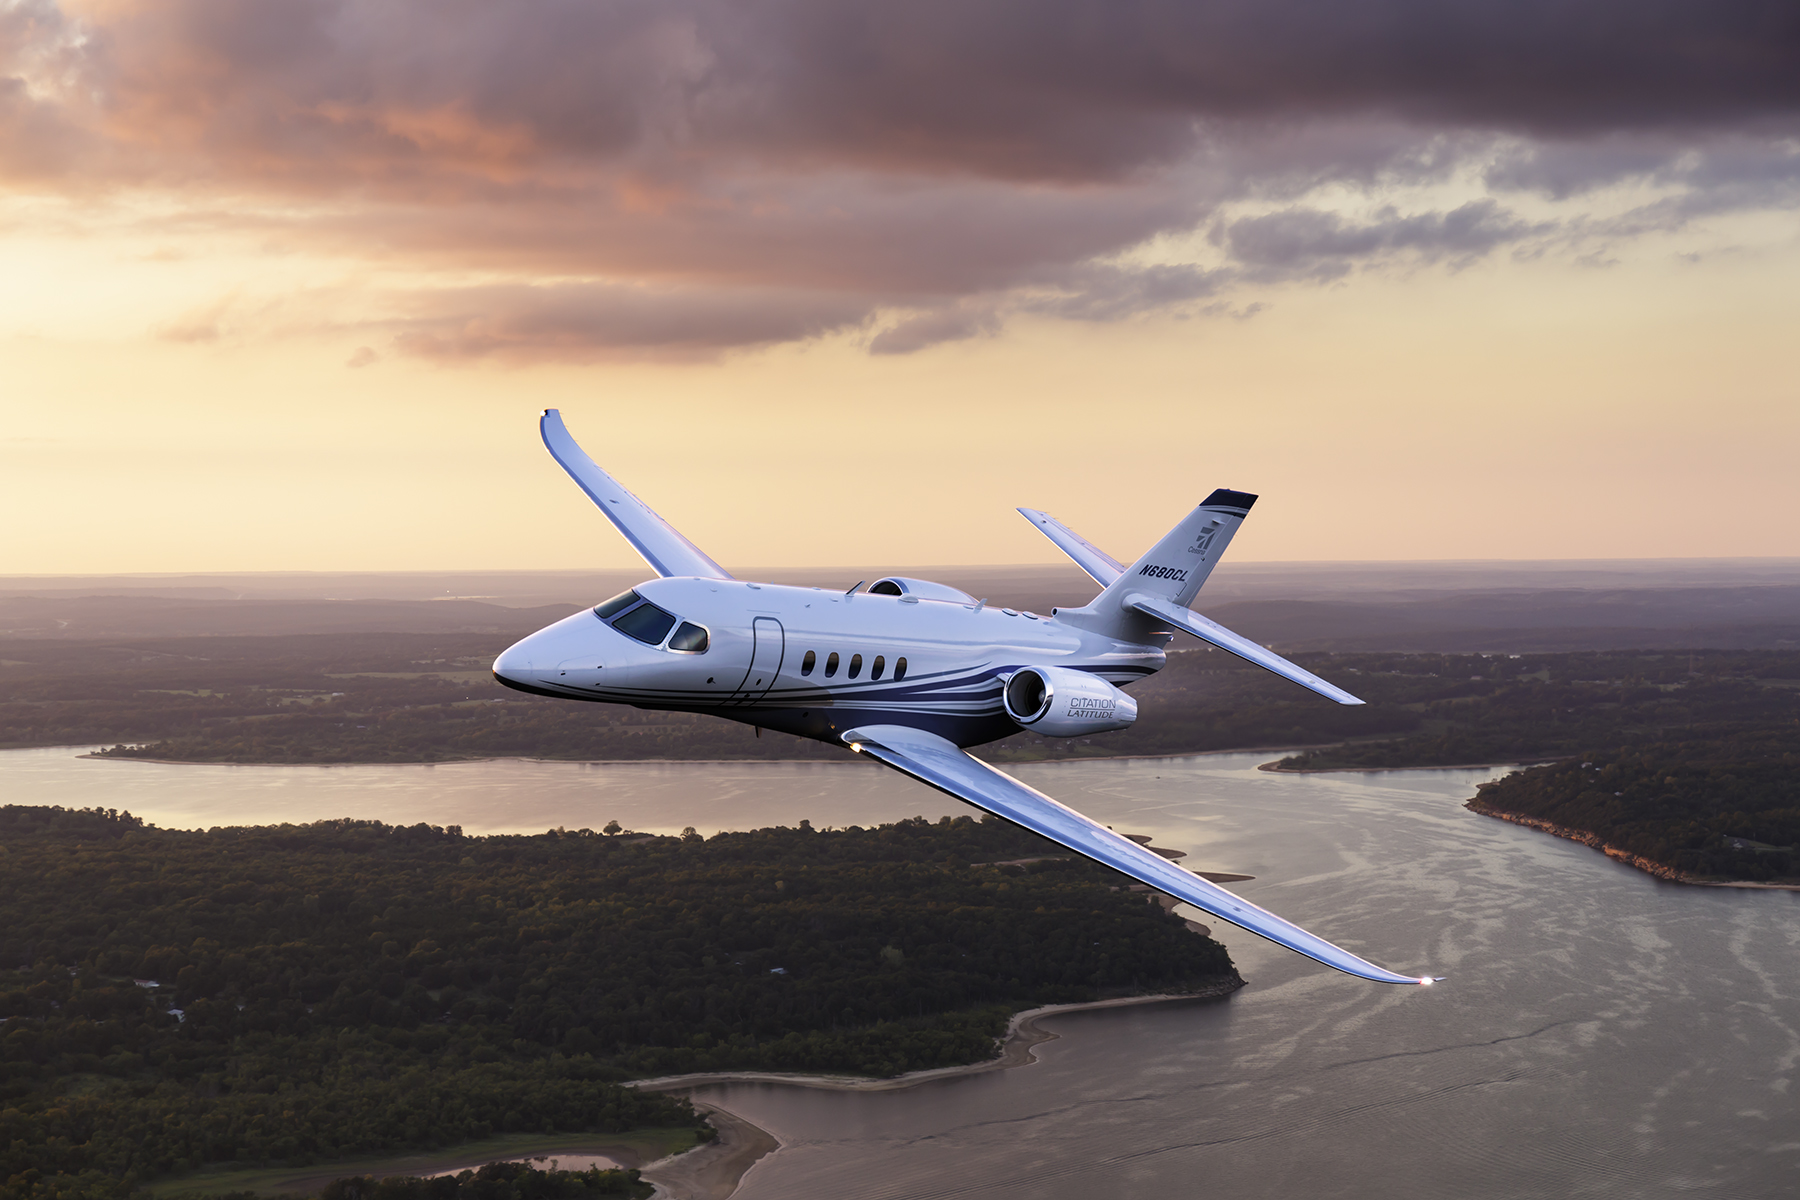 Textron Aviation expands in-flight connectivity options for Citation business jets